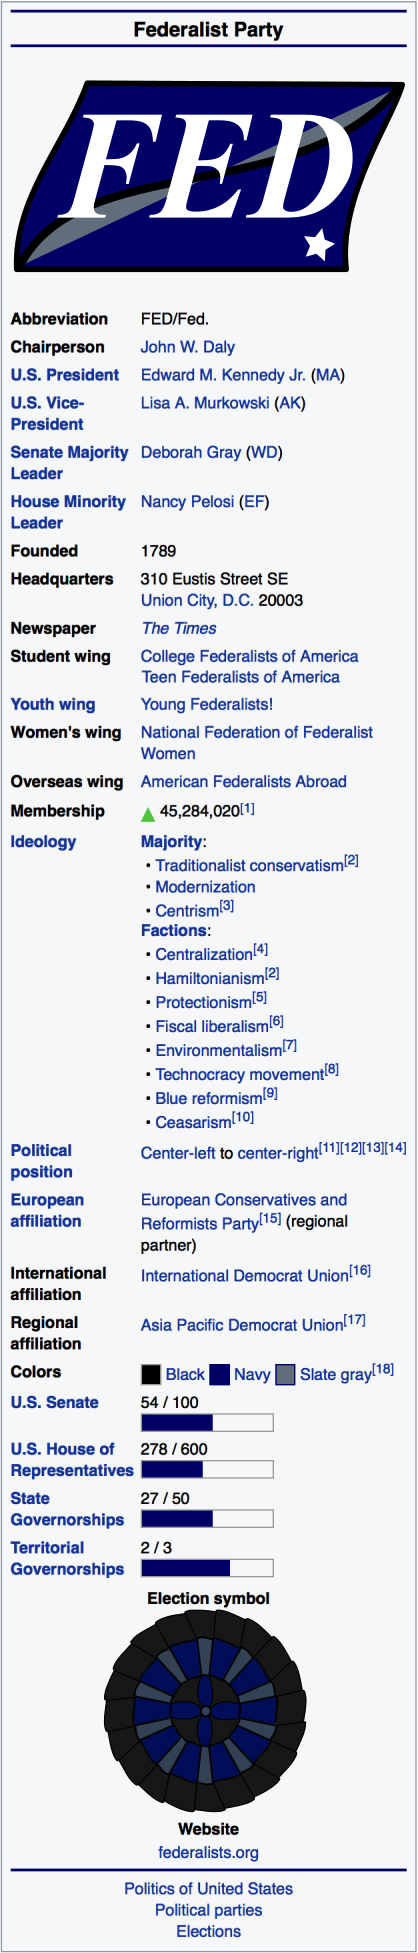 fedpartywikibox.png